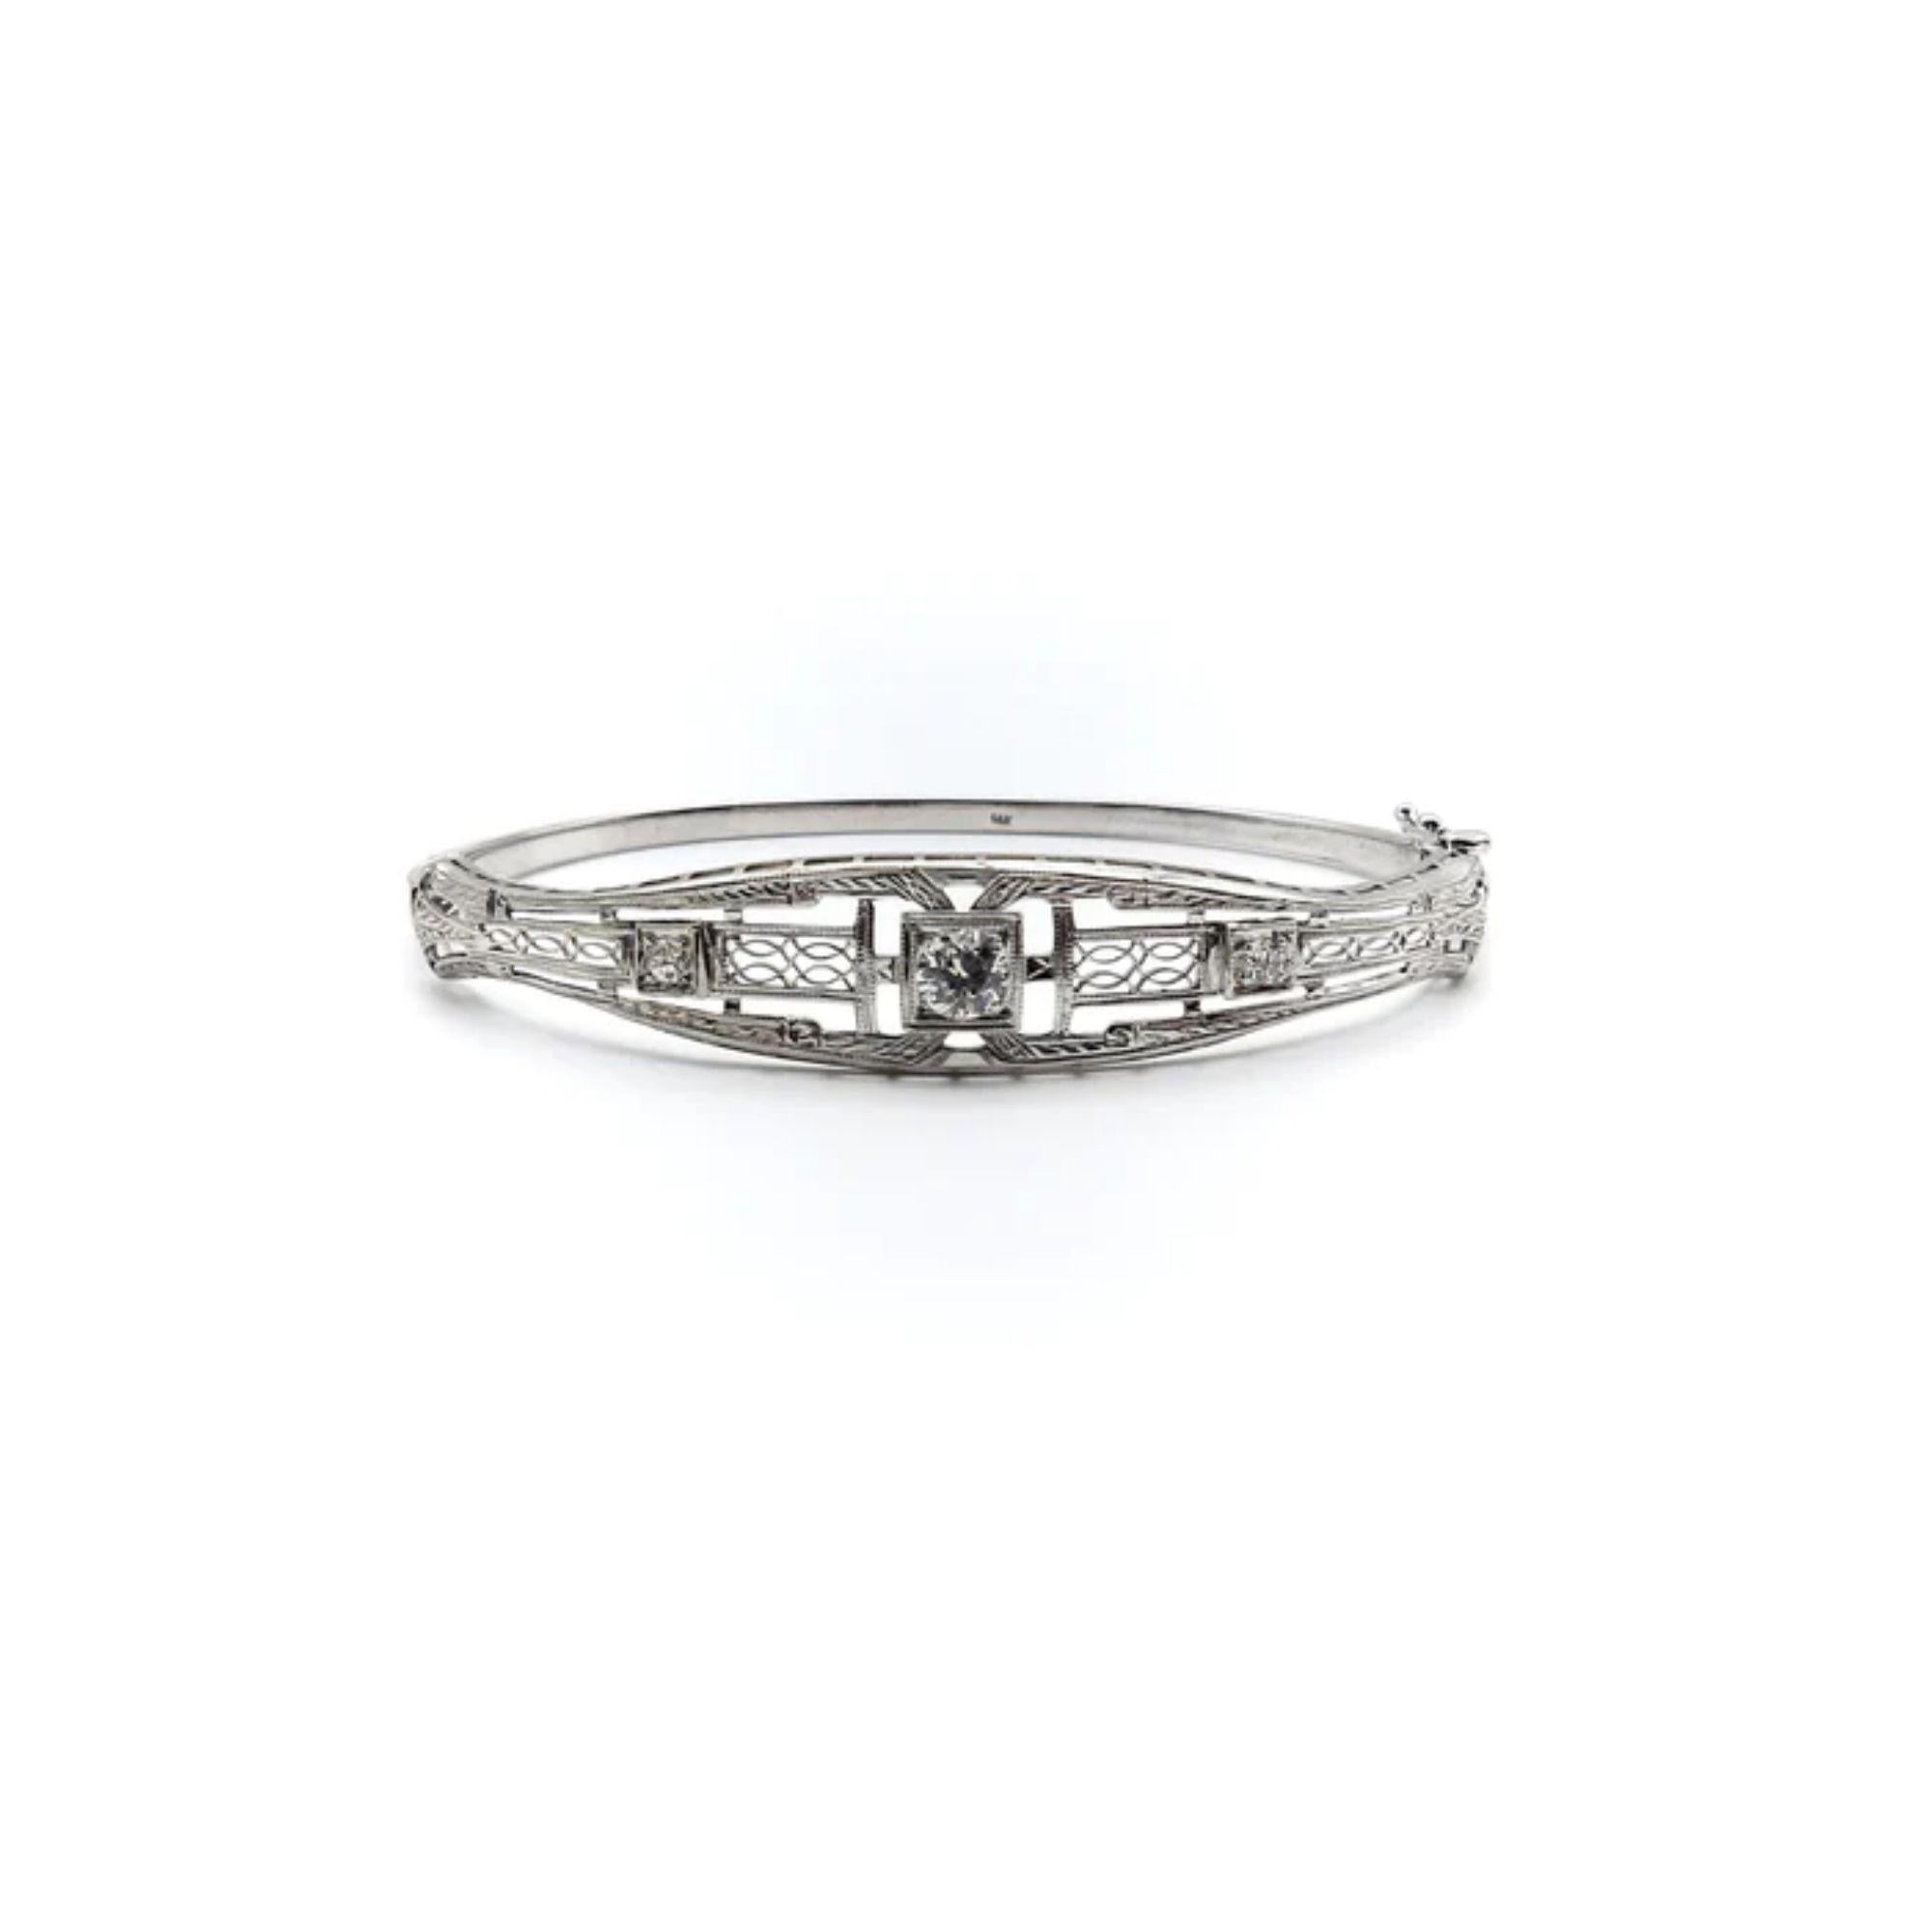 Part of Kirsten’s Corner signature line, this bracelet was converted from a beautiful Art Deco bar pin by carefully bending it to create a bangle. The focal point of the piece is the center stone, a transitional cut round diamond set in a square